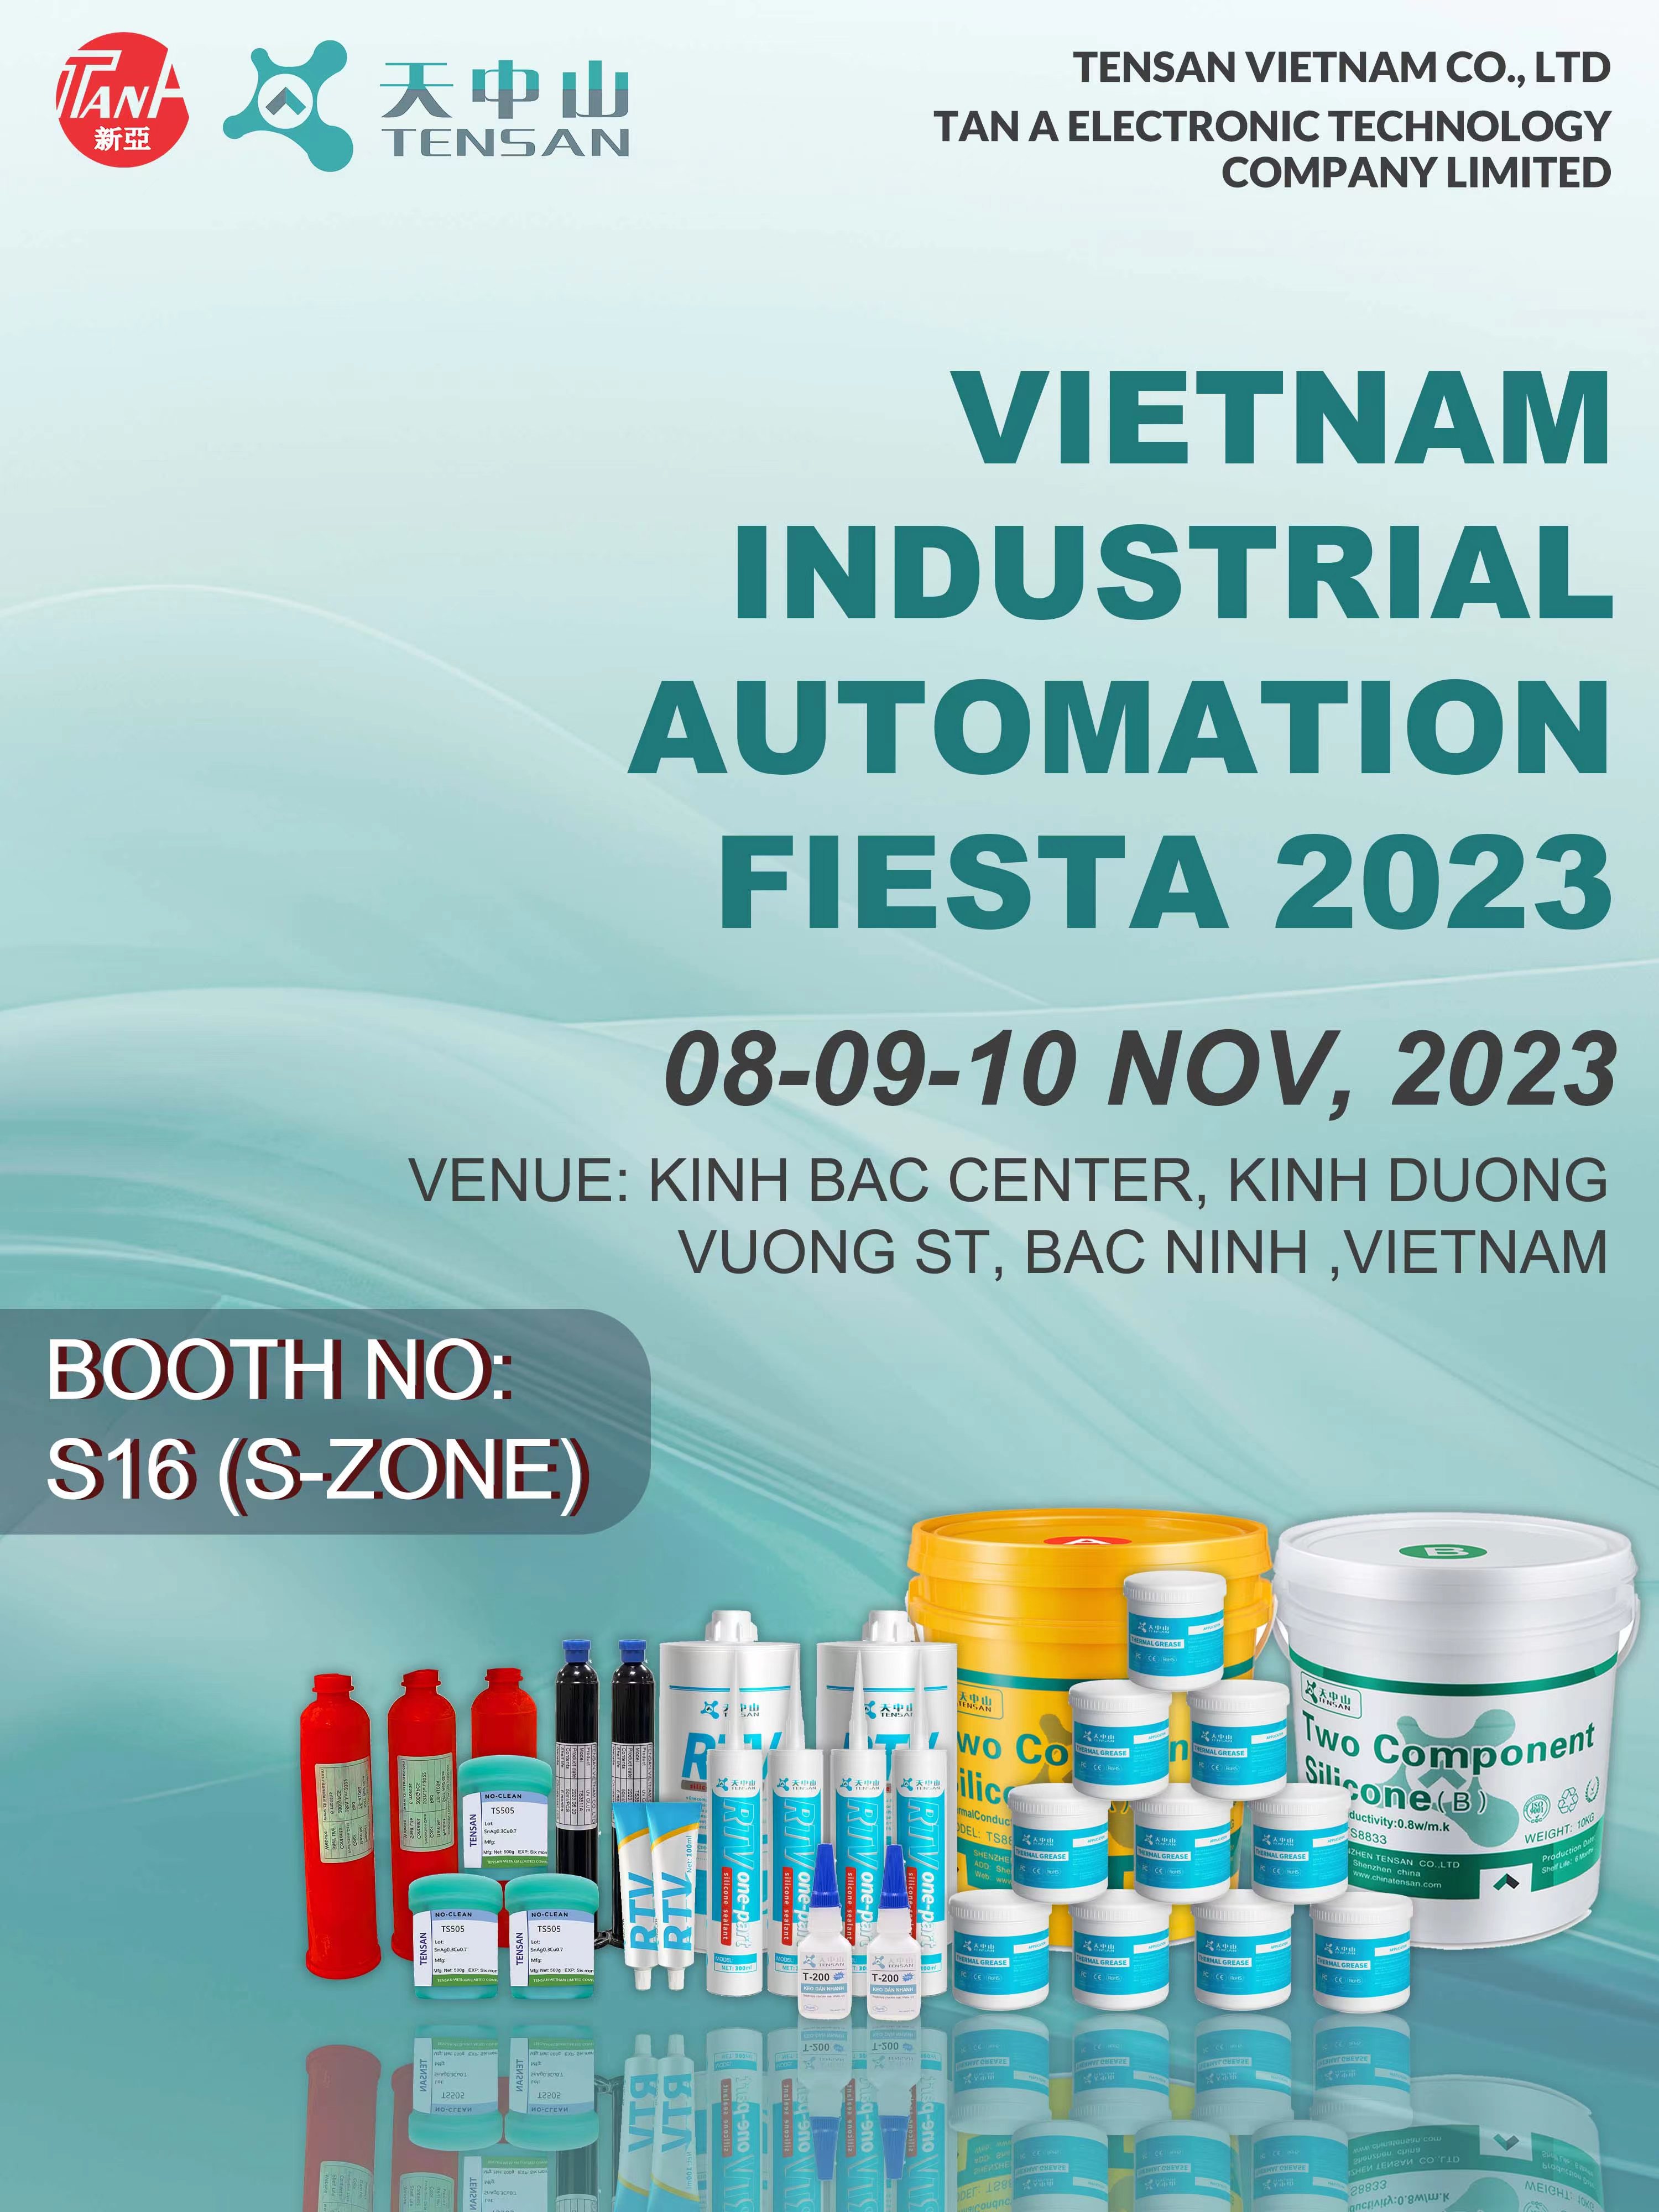 Shenzhen Tensan Limited Company participated in Vietnam Industrial Automation Fiesta 2023 to lead the revolution in factory automation and smart manufacturing